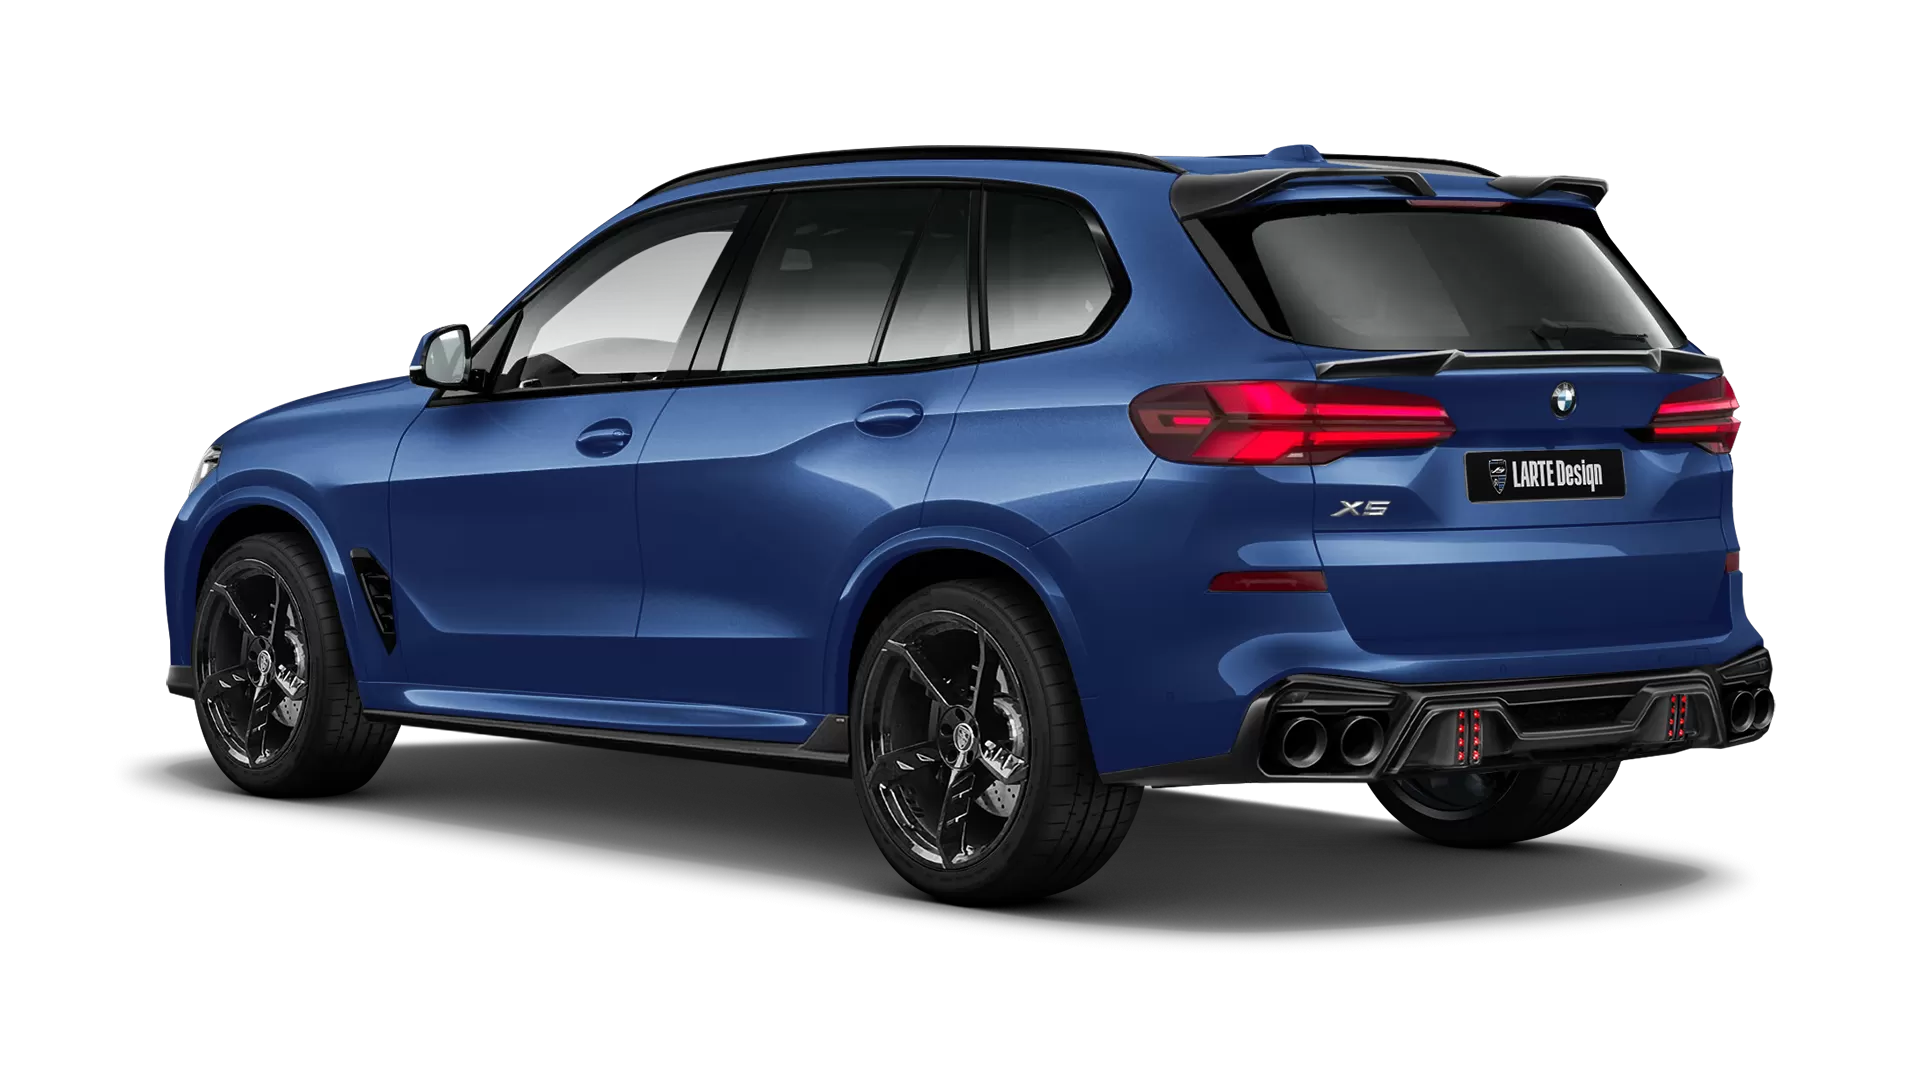 BMW X5 G05 LCI Facelift with painted body kit: rear view shown in Marina Bay Blue